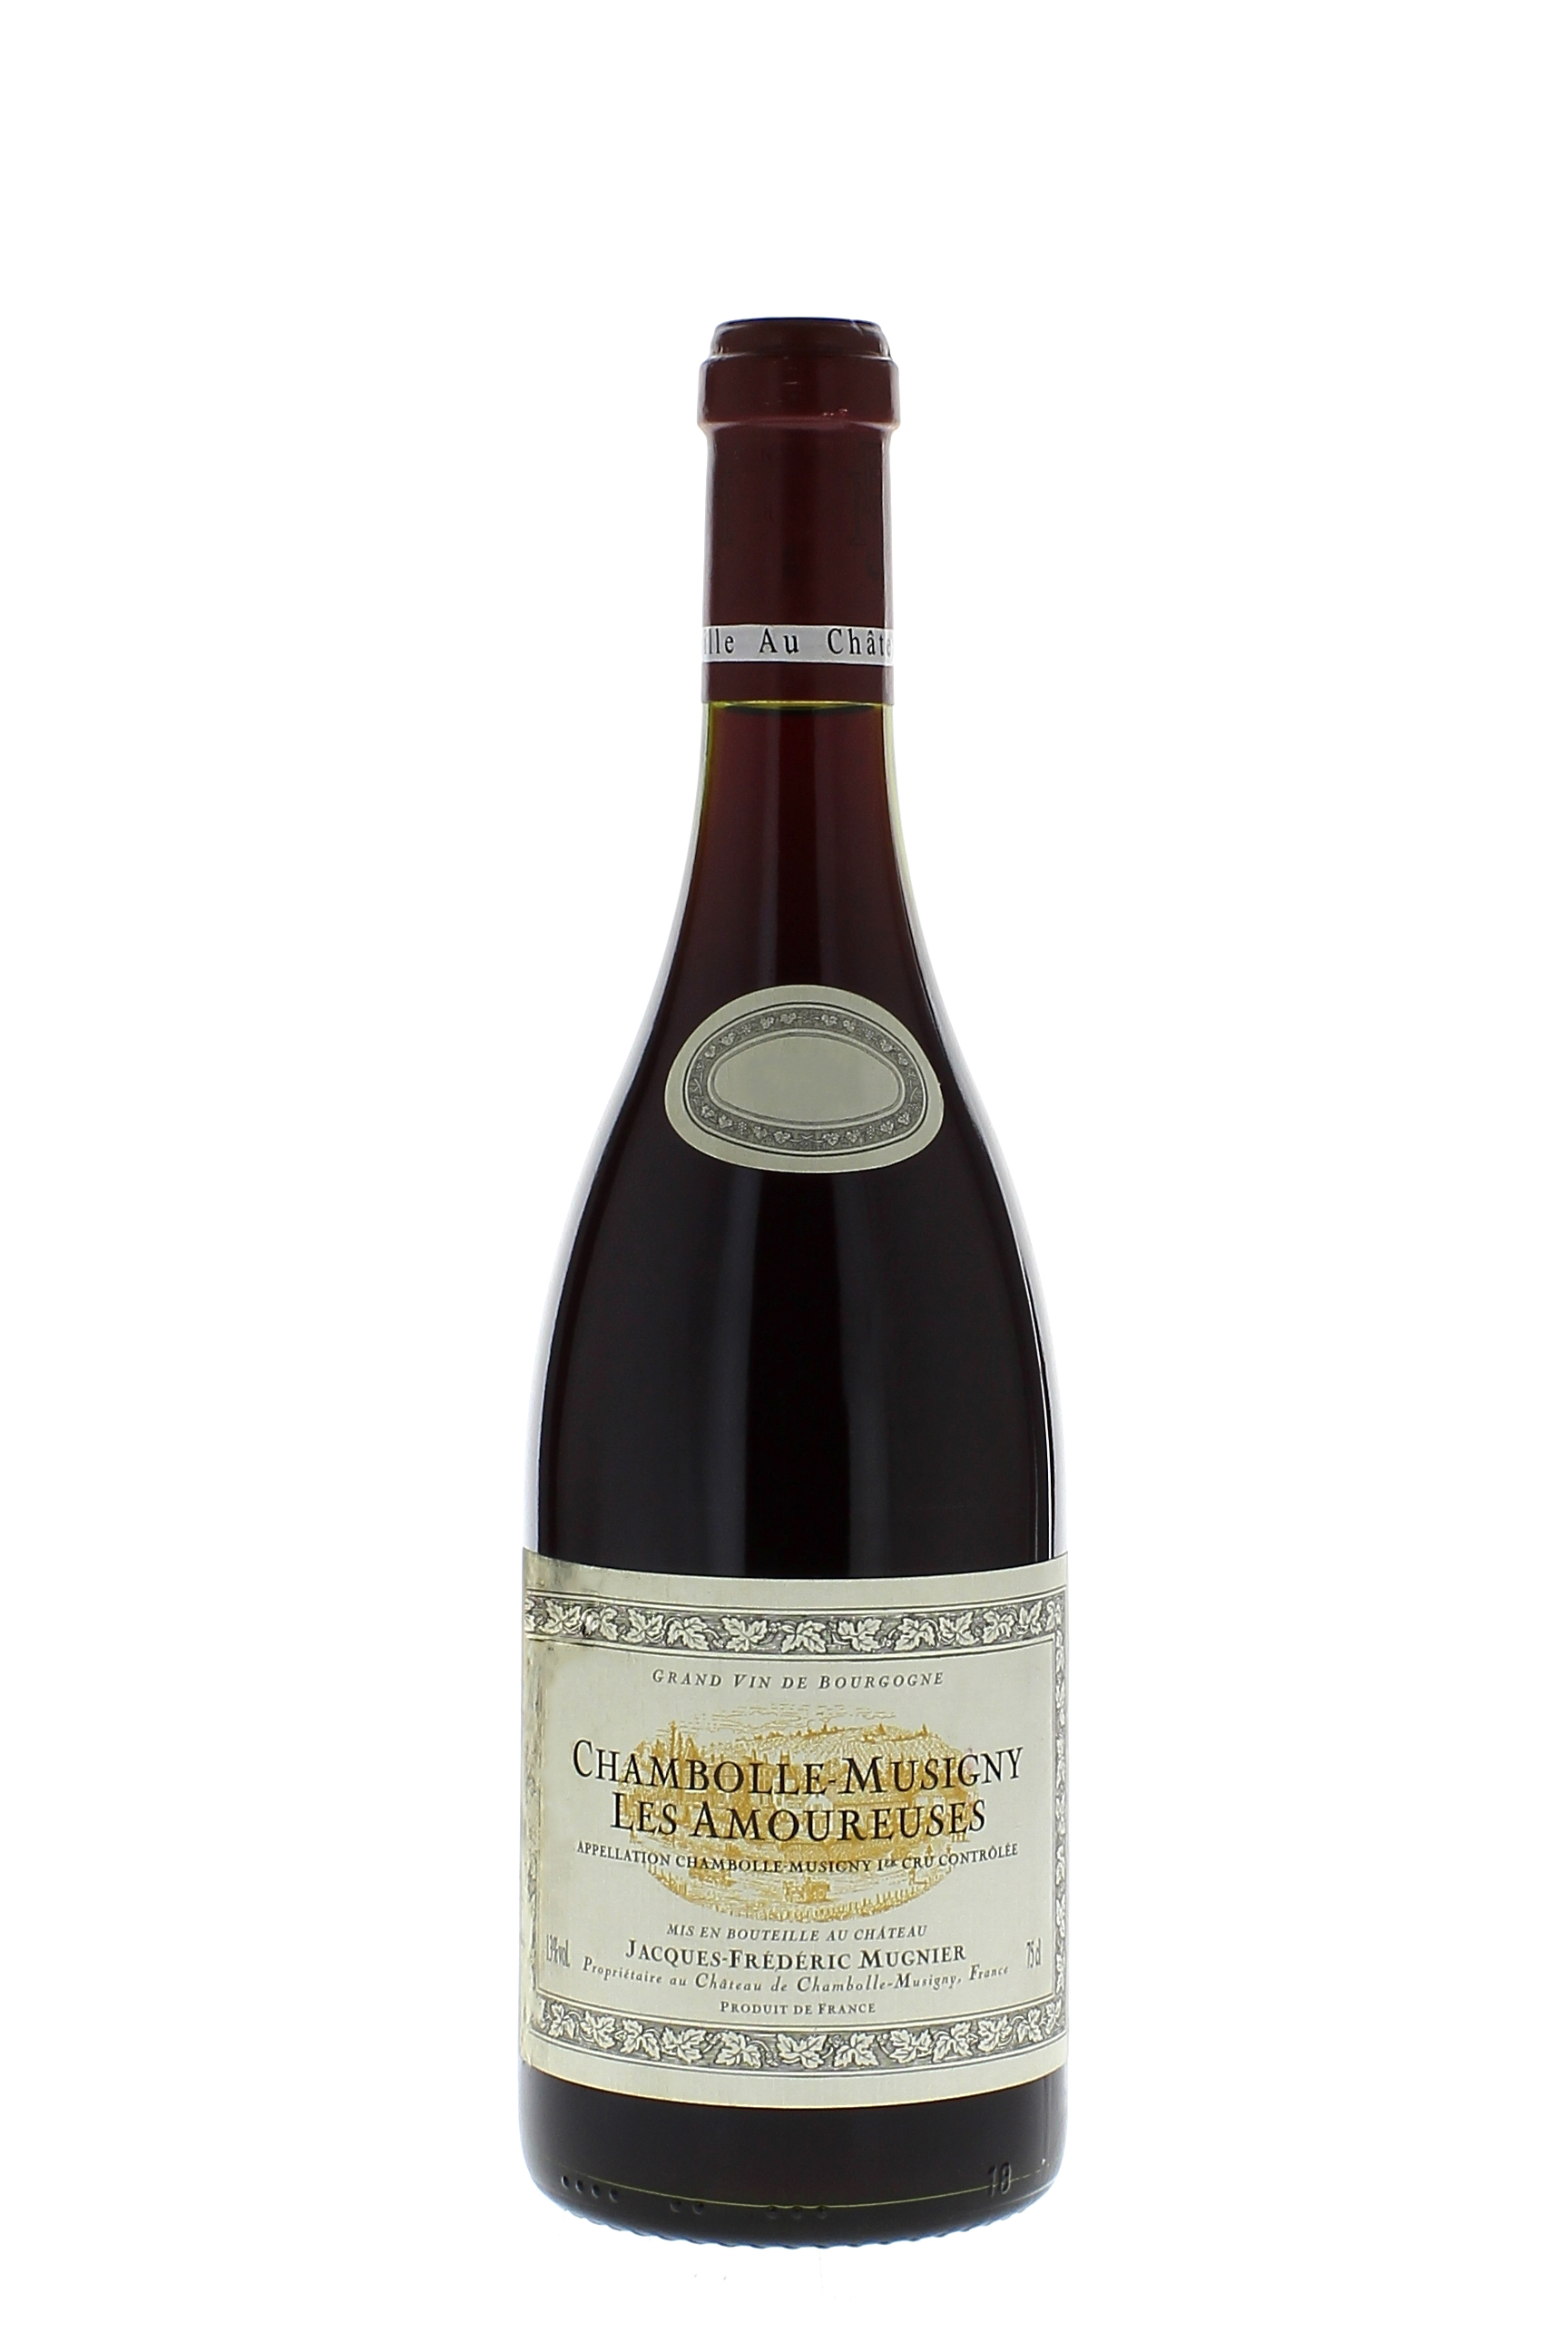 Chambolle musigny 1er cru les amoureuses 2000 Domaine Domaine MUGNIER Jacques Frederic, Bourgogne rouge